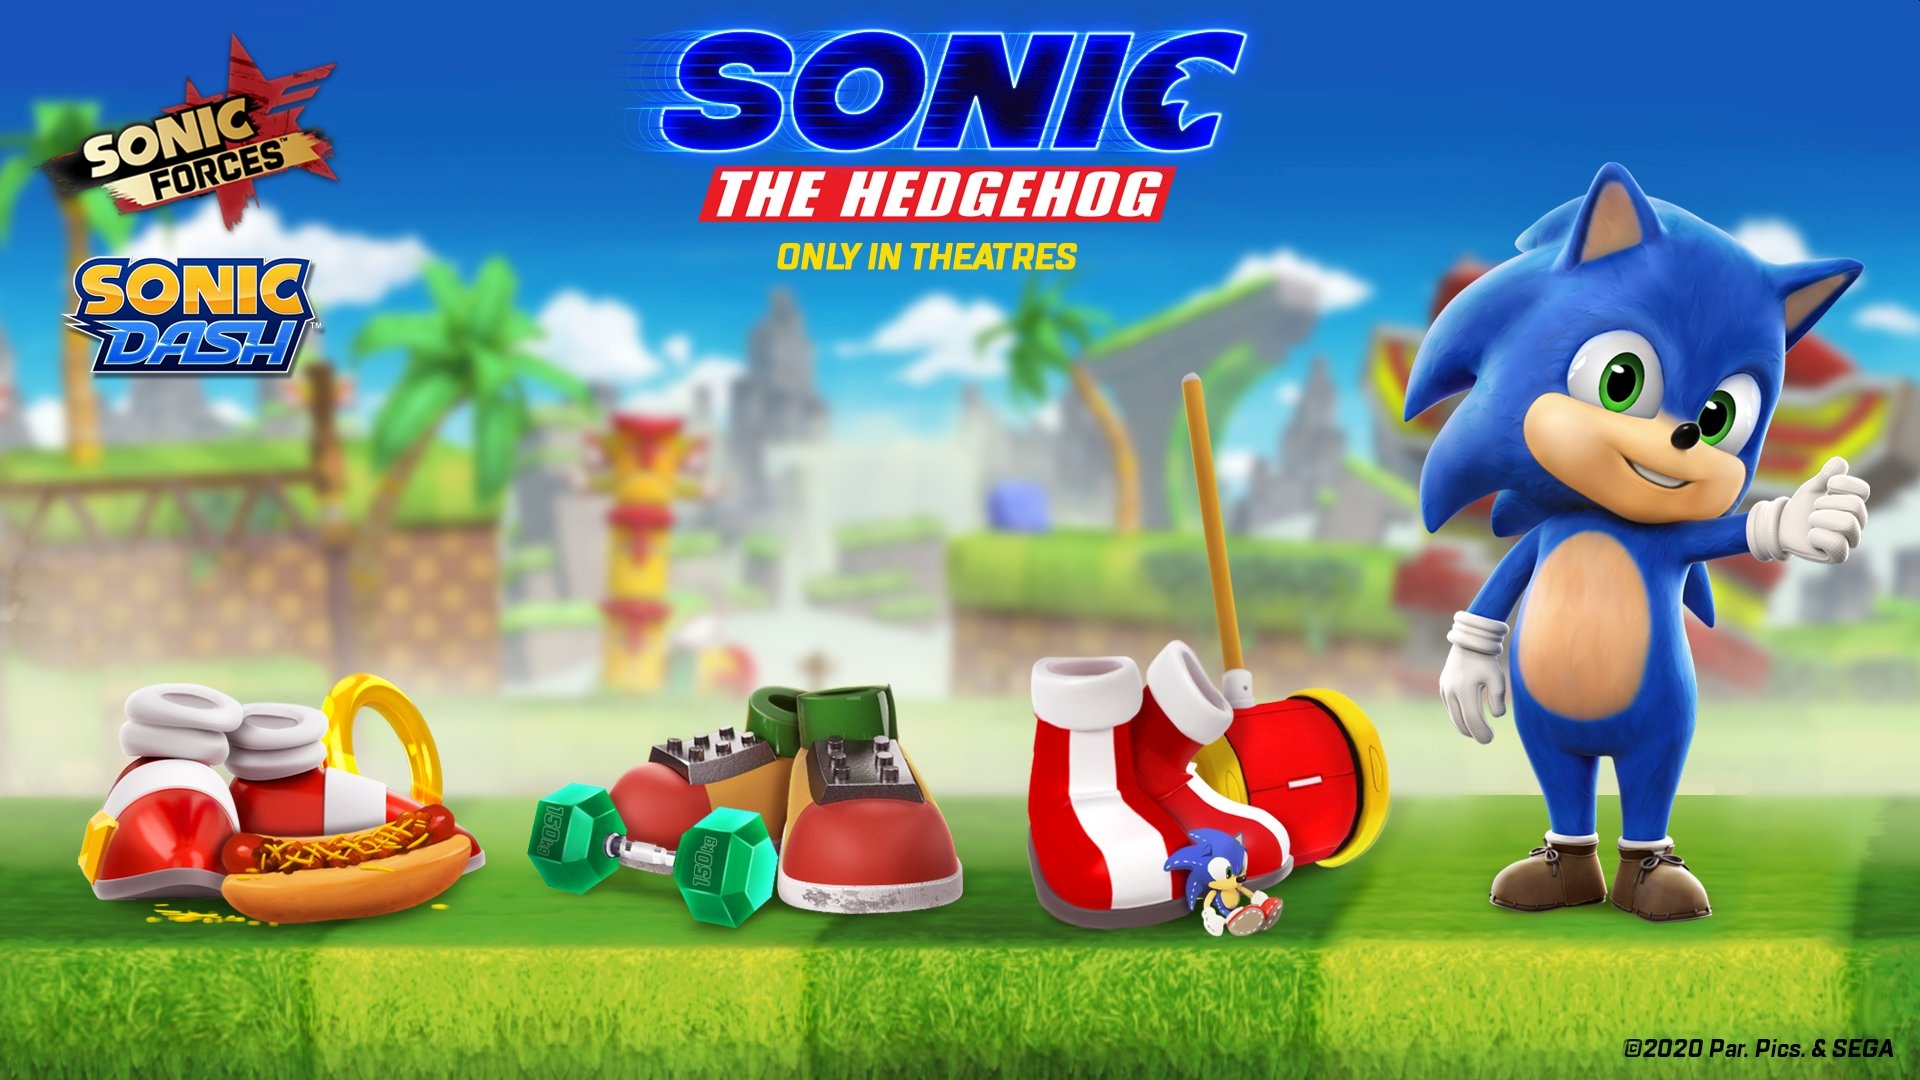 Baby Sonic Joins Sonic Forces Mobile And Sonic Dash Mobile Games As Part of Movie Collaboration